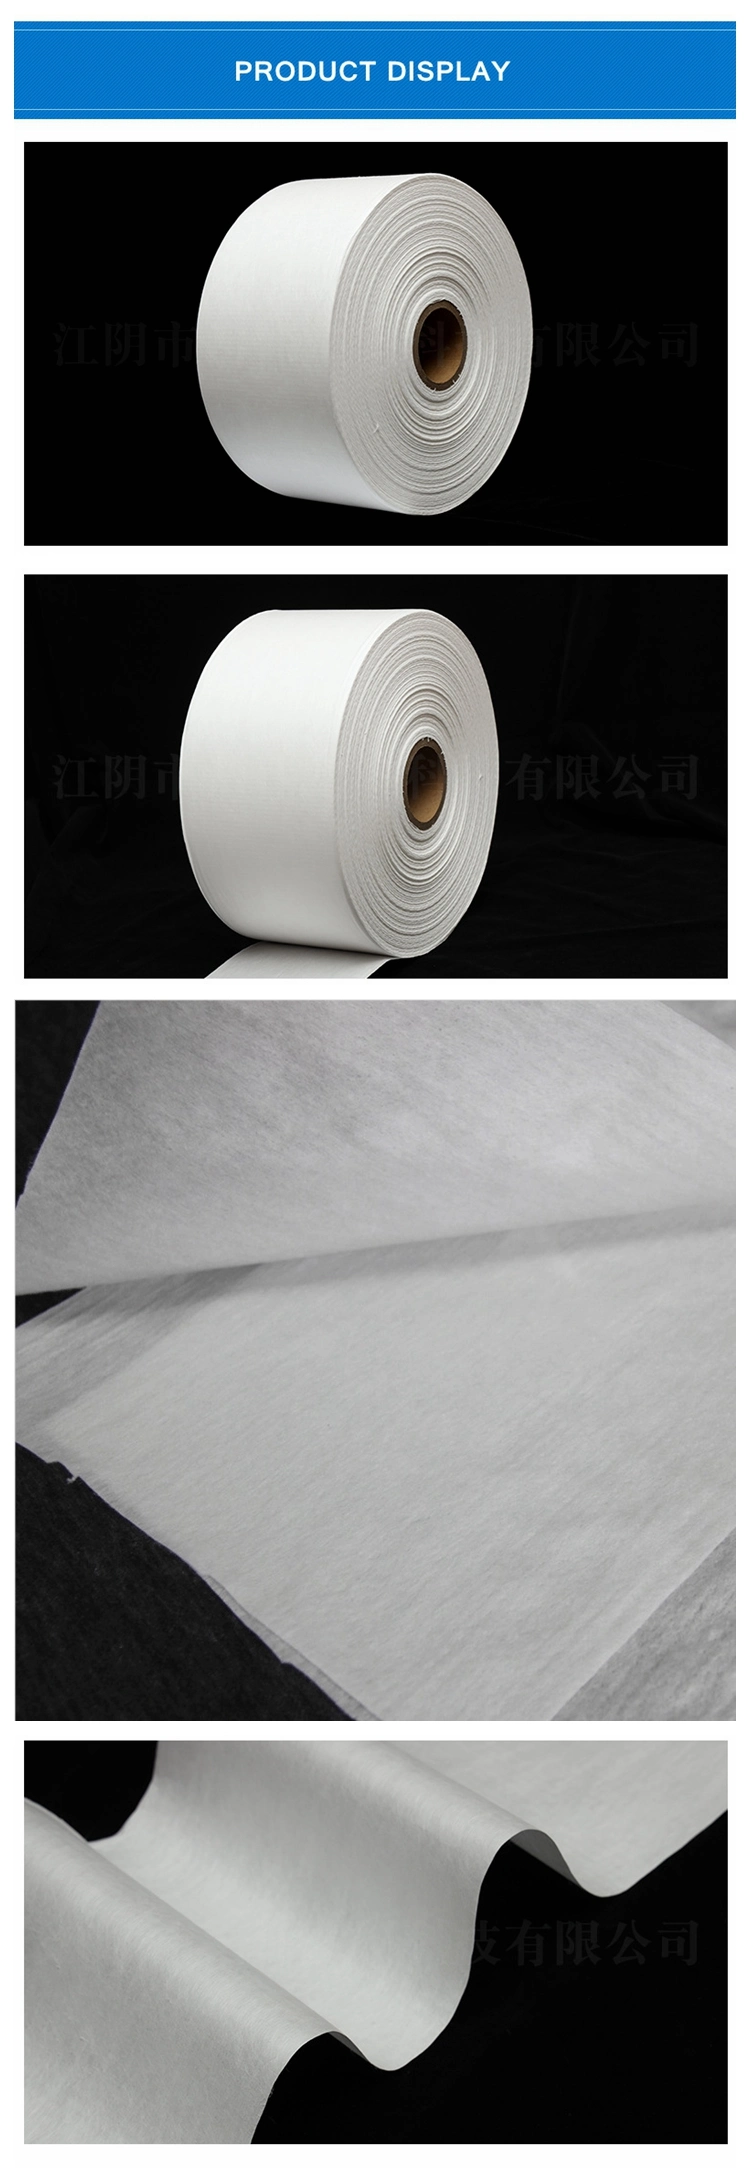 25GSM 175mm Meltblown 100% PP Bfe99/Bfe95 Meltblown Non Woven Fabric